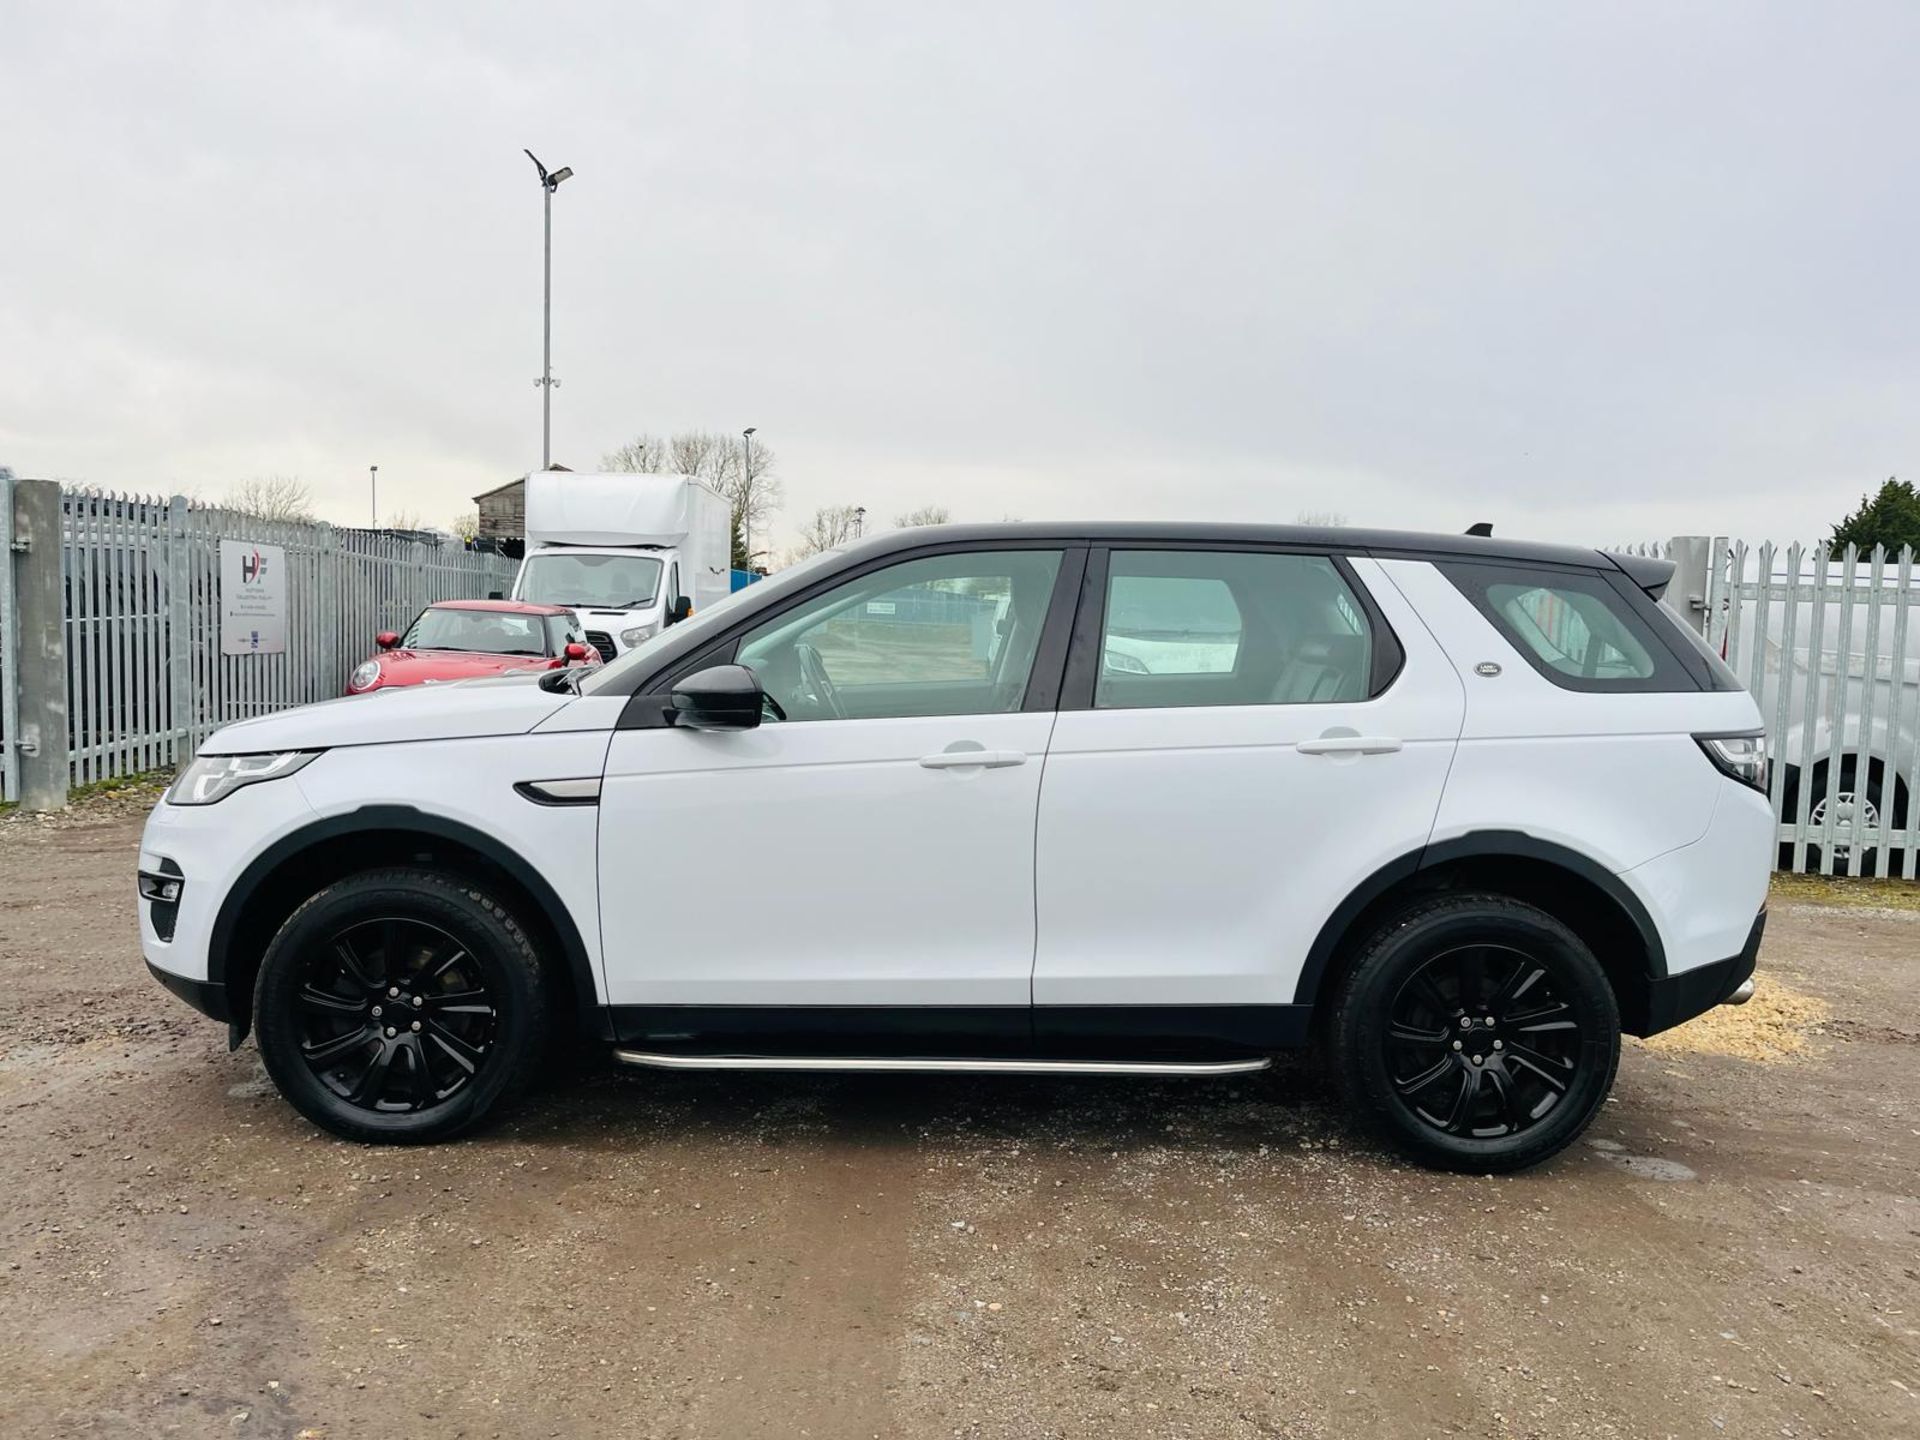 ** ON SALE ** Land Rover Discovery Sport 2.0 SE TD4 180 Automatic -2016'16 Reg' -ULEZ Compliant - Image 4 of 35